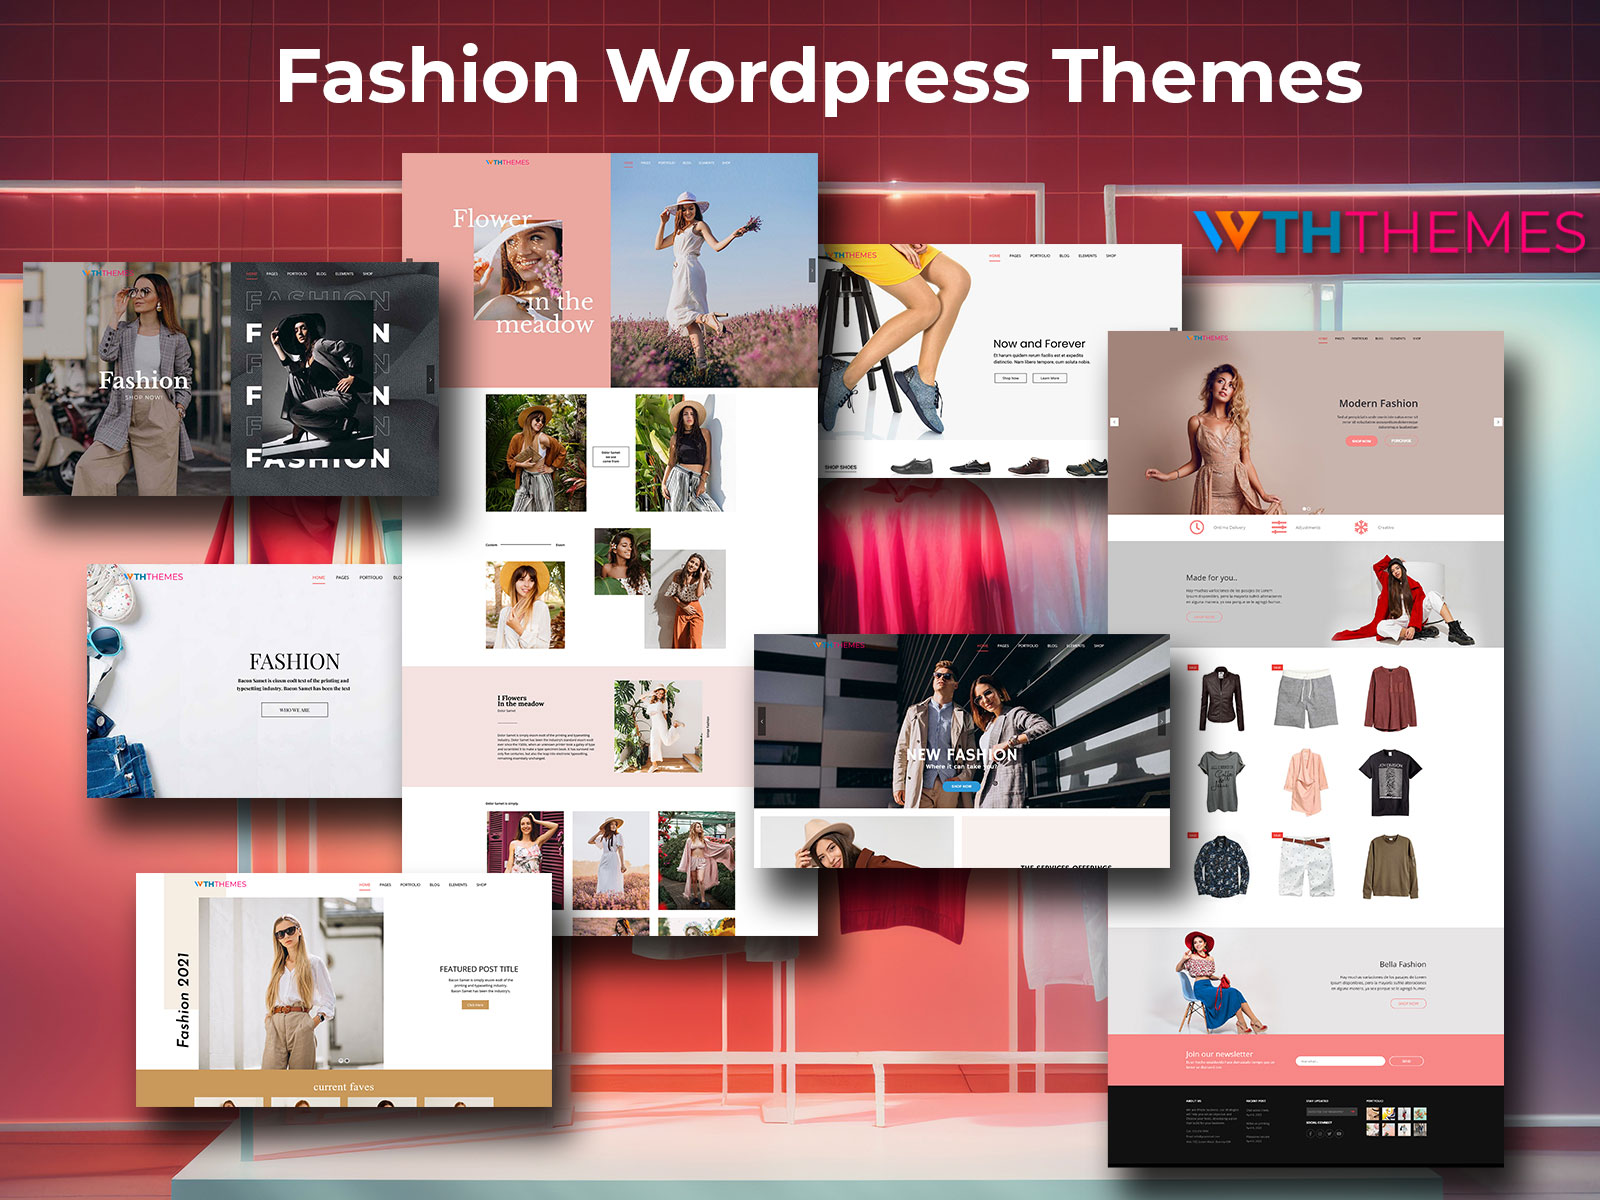 Find Our Most Popular Fashion WordPress Theme For Your Website